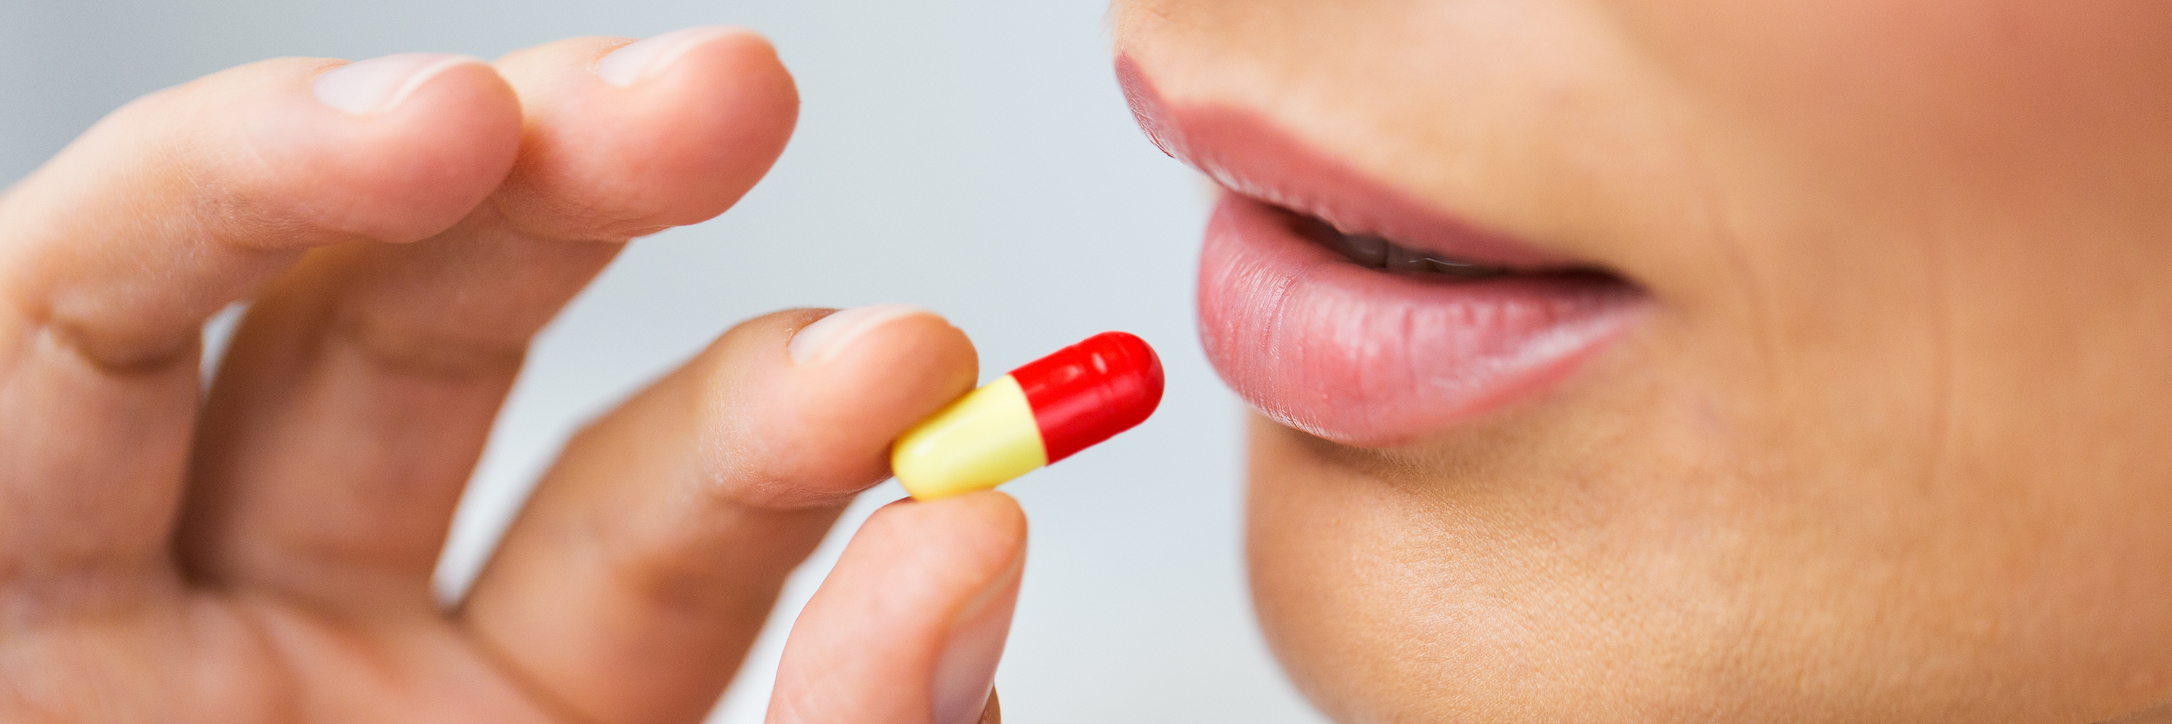 woman taking yellow and red pill close up